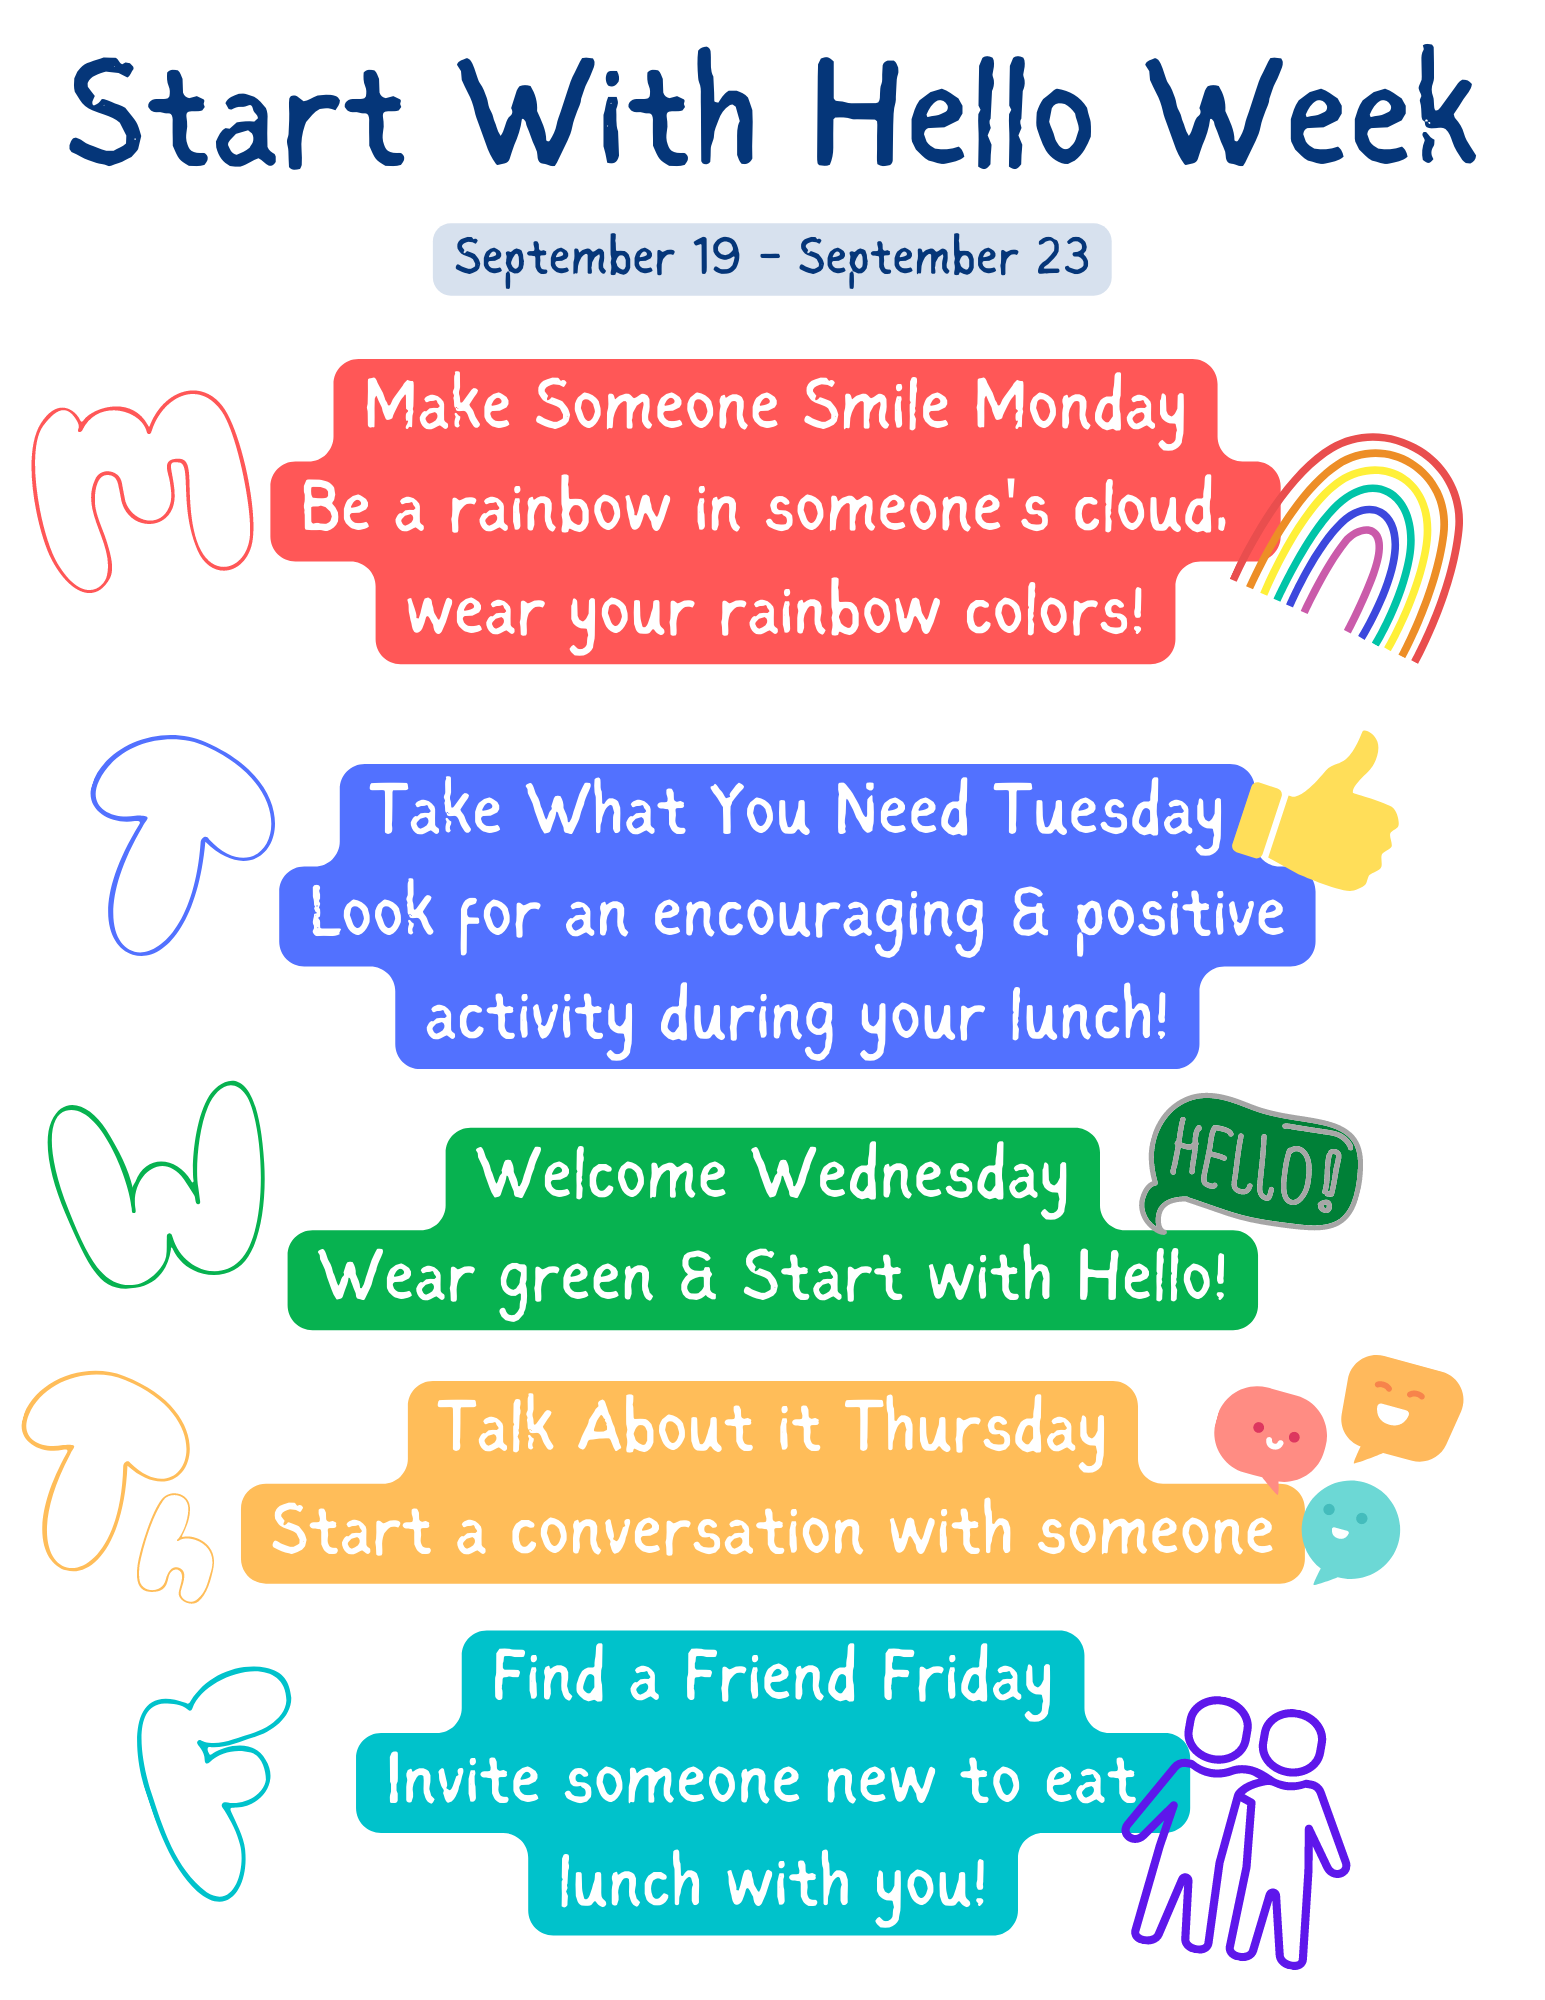 Picture of Start with Hello Week activities: Monday- Wear rainbow colors, Tuesday- positive activity during lunch, Wednesday- wear green, Thursday- conversations, Friday- invite a friend to lunch